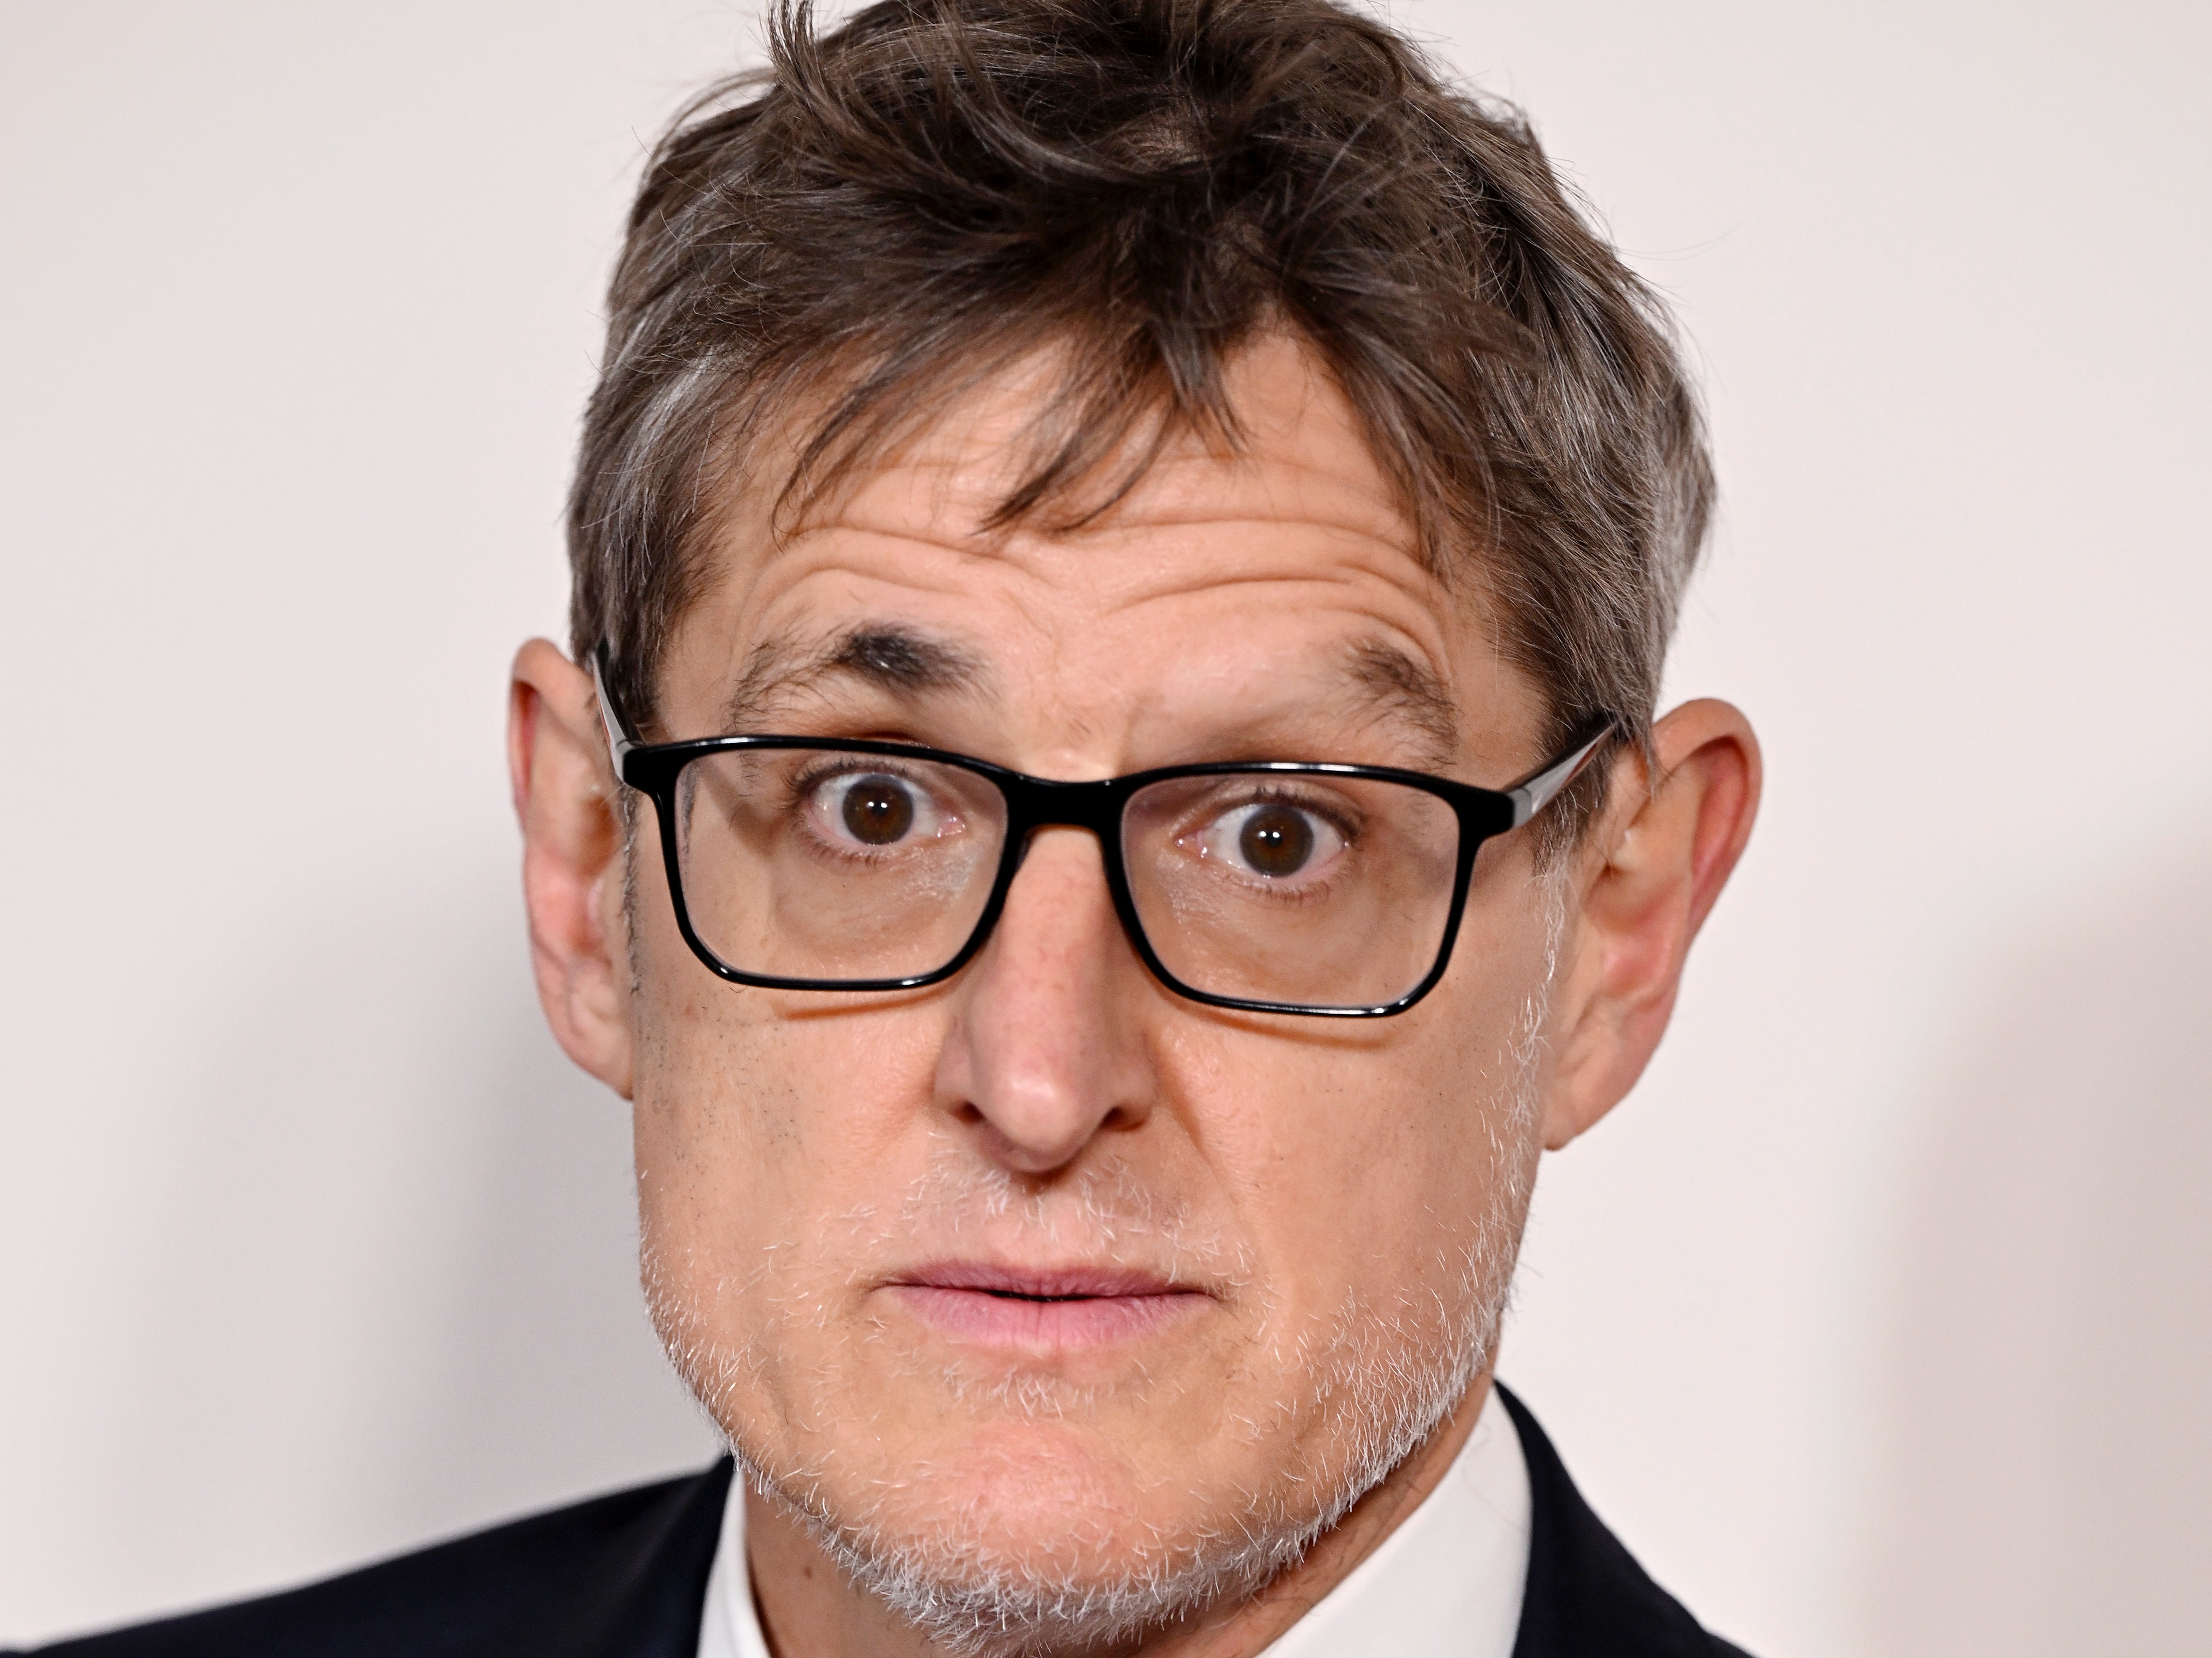 Theroux has floated the idea of having his eyebrows tattooed back on